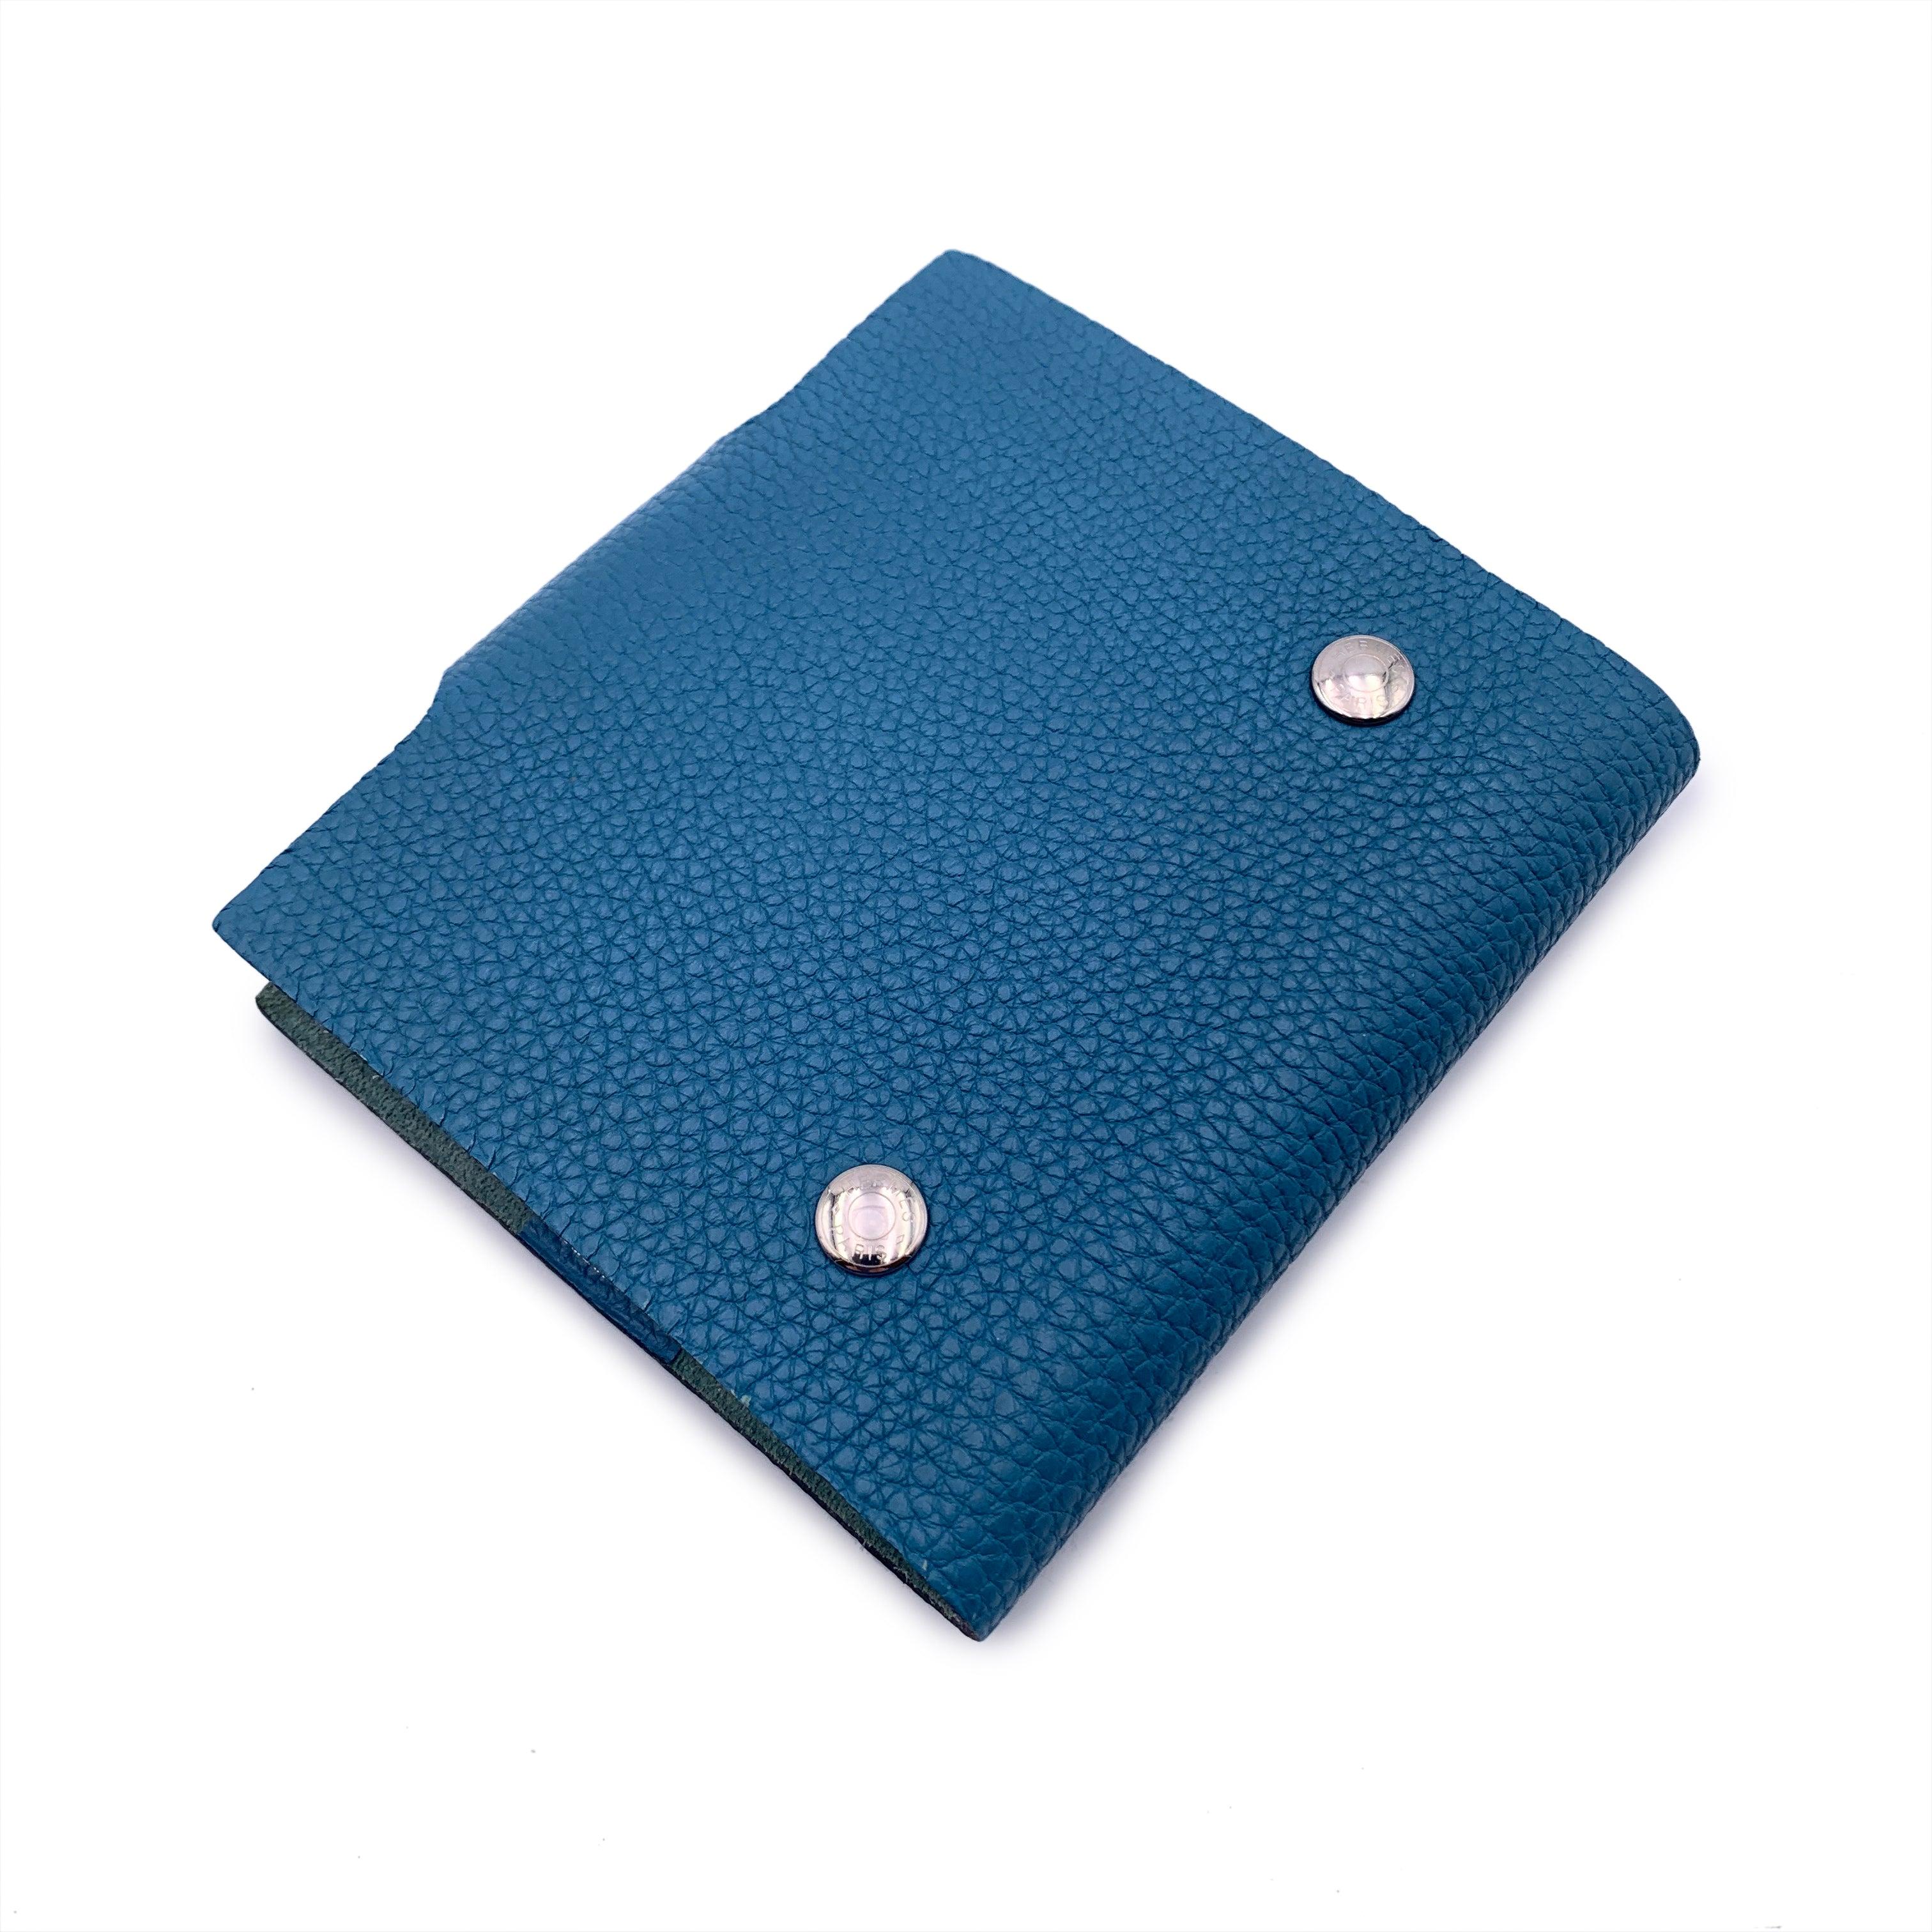 Hermès mini ULYSSE notebook cover in light blue Togo leather, palladium silver tone hardware. The cover opens with a snap to a suede interior. Original Hermes refill included. Logos / Tags: 'HERMES Paris - Made in France' tag inside, embossed data